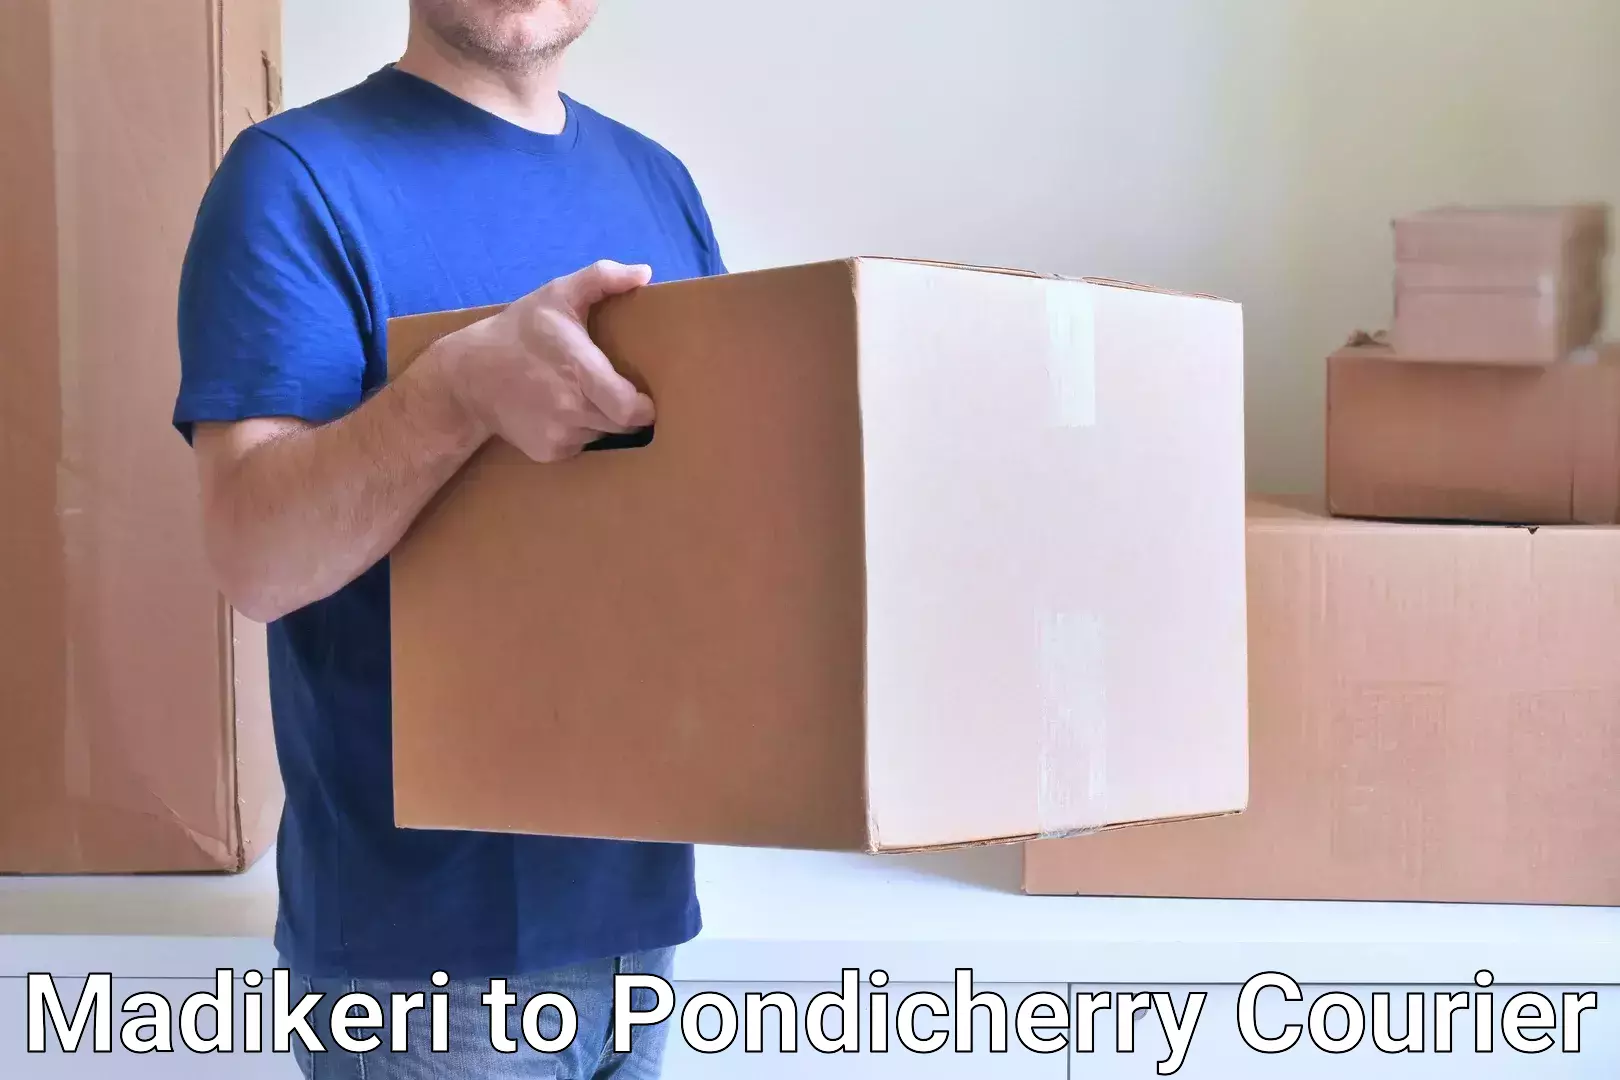 State-of-the-art courier technology Madikeri to Pondicherry University